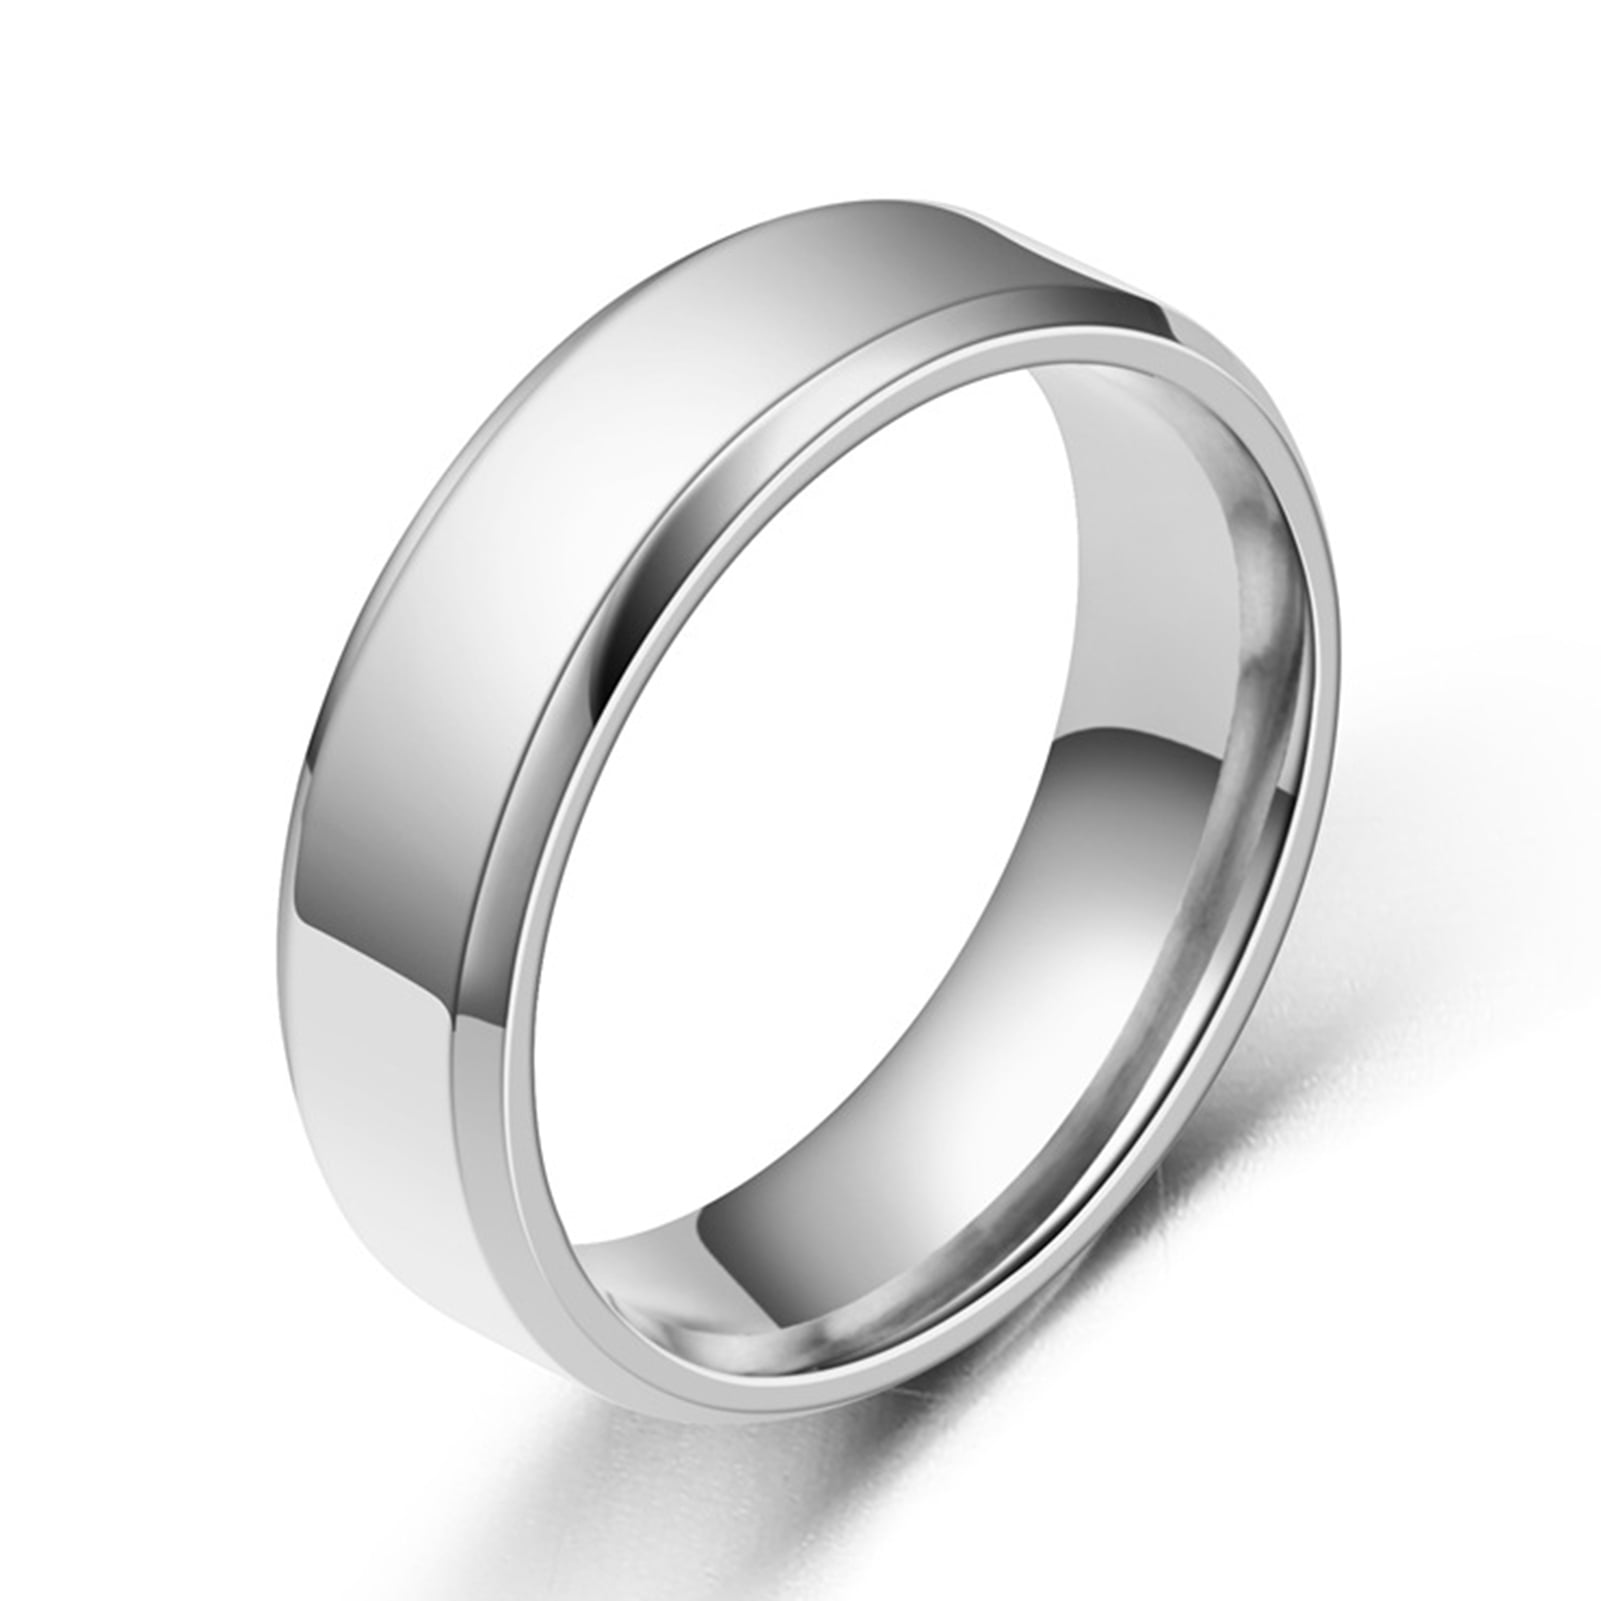 Stainless Steel Basic Plain Ring 7mm Dome Polished Comfort Fit Wedding  Band, Unisex Style for Both Men and Women - Walmart.com